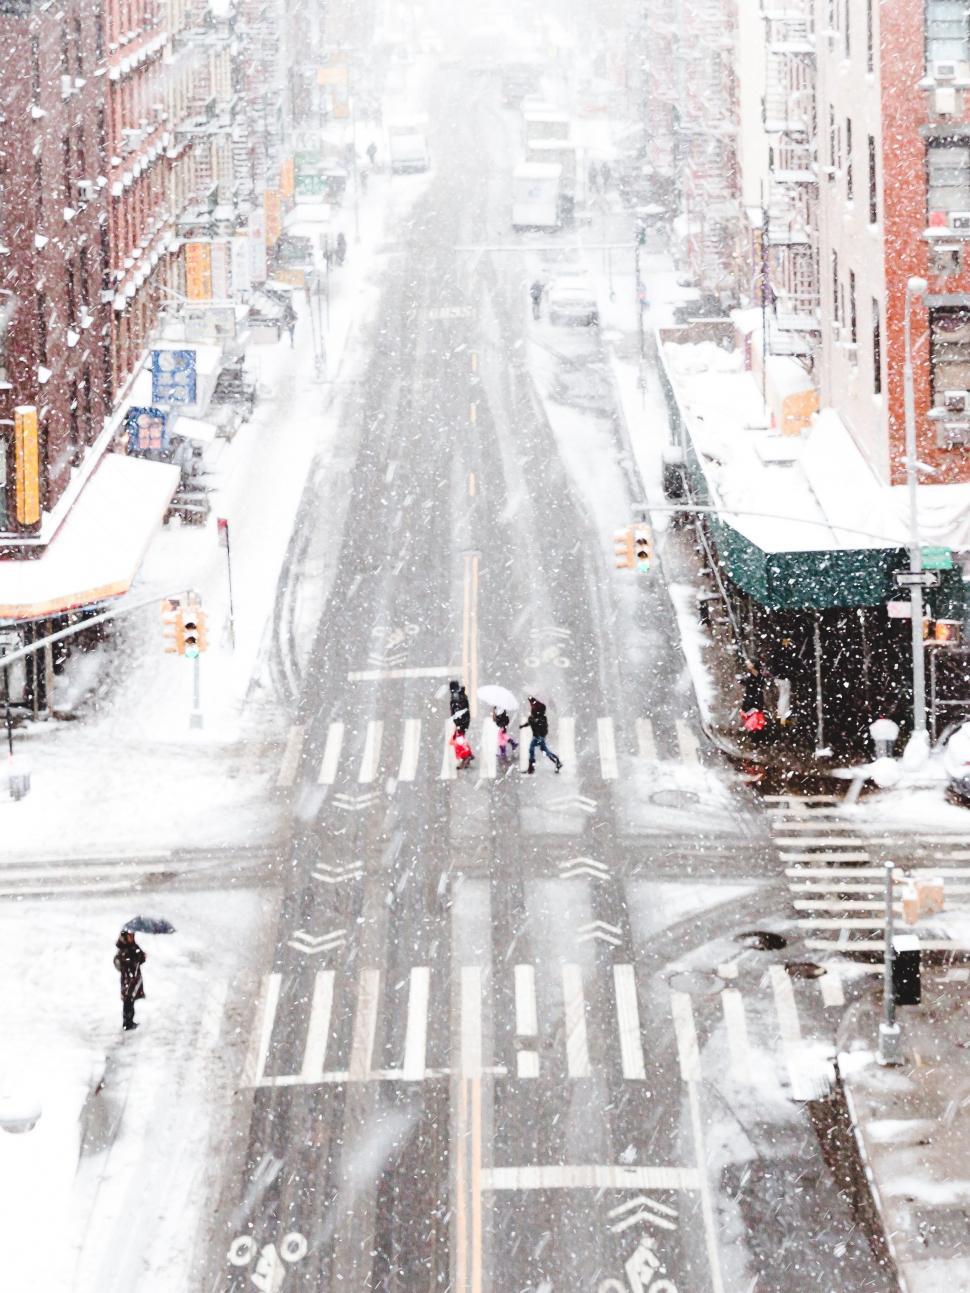 Free Image of Busy Snowy City Street With Traffic 